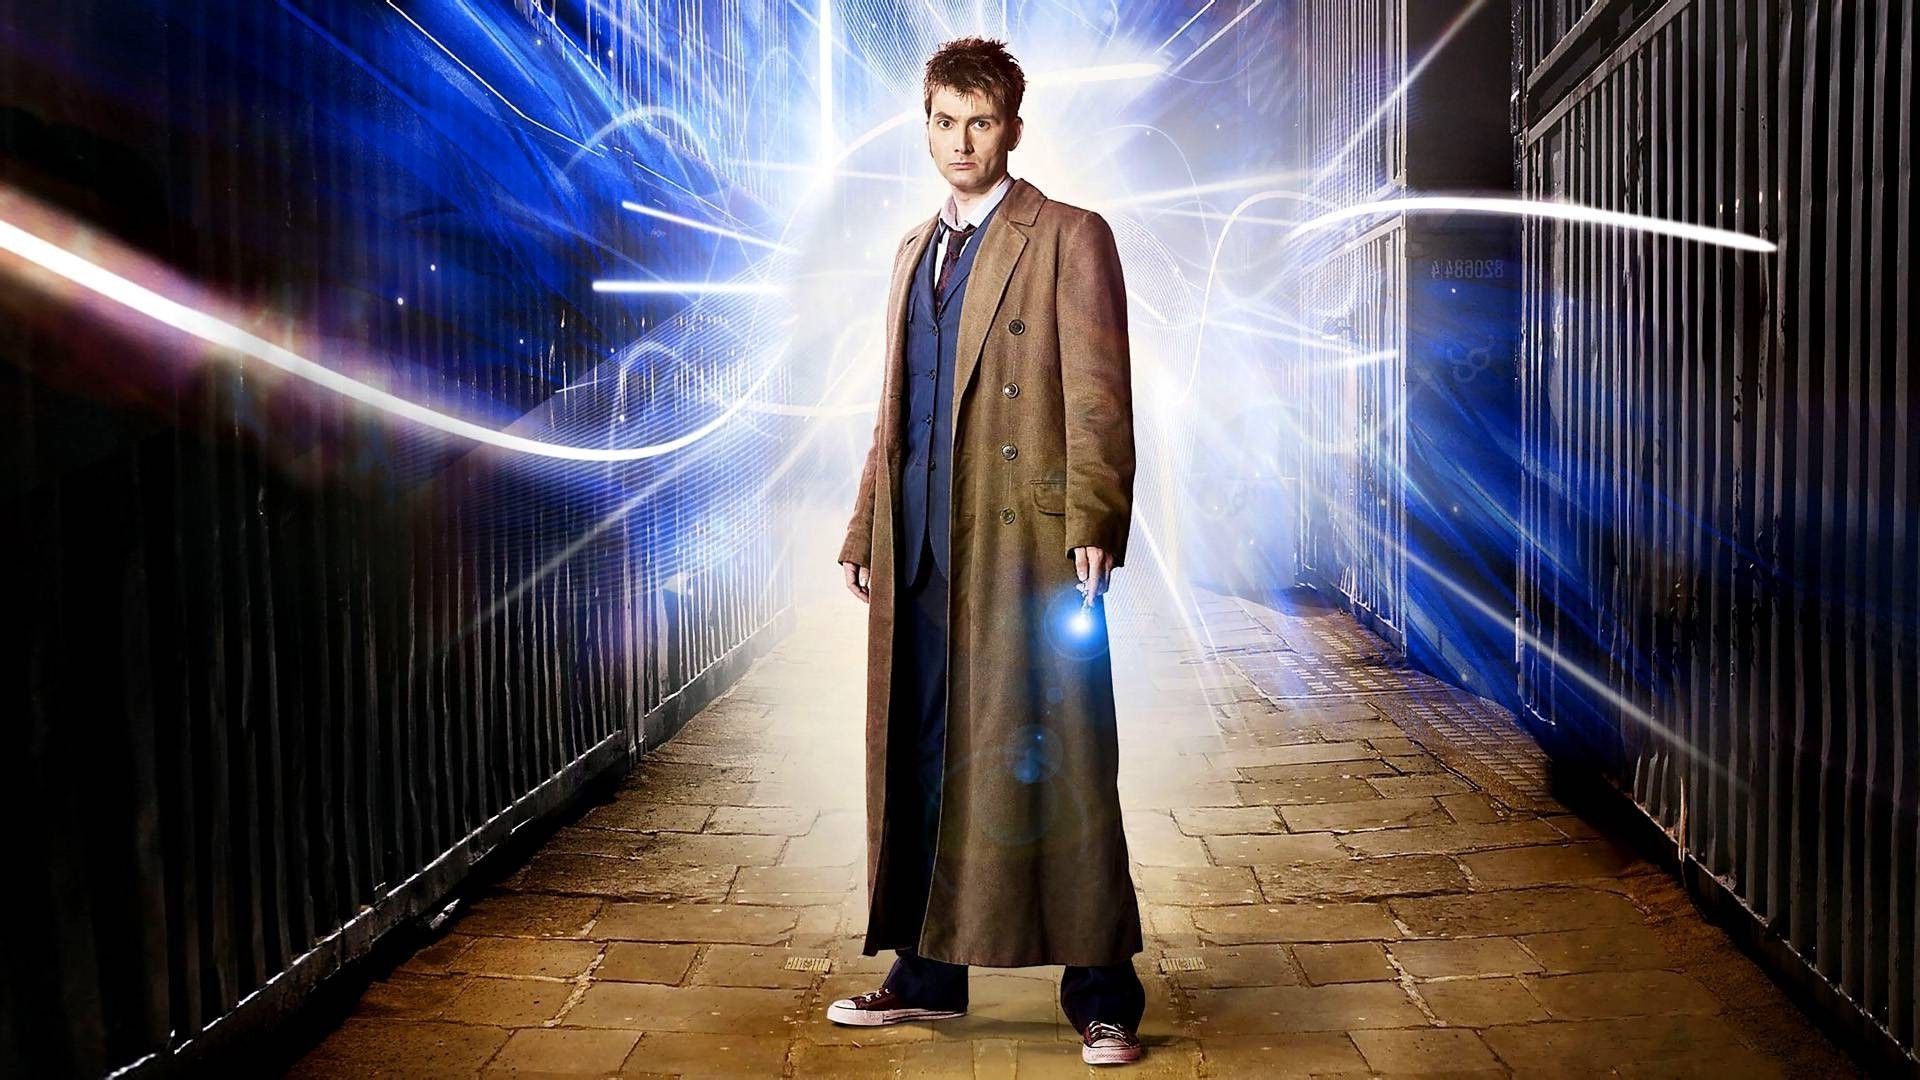 1920x1080 A Plethora of Doctor Who Wallpapers âº